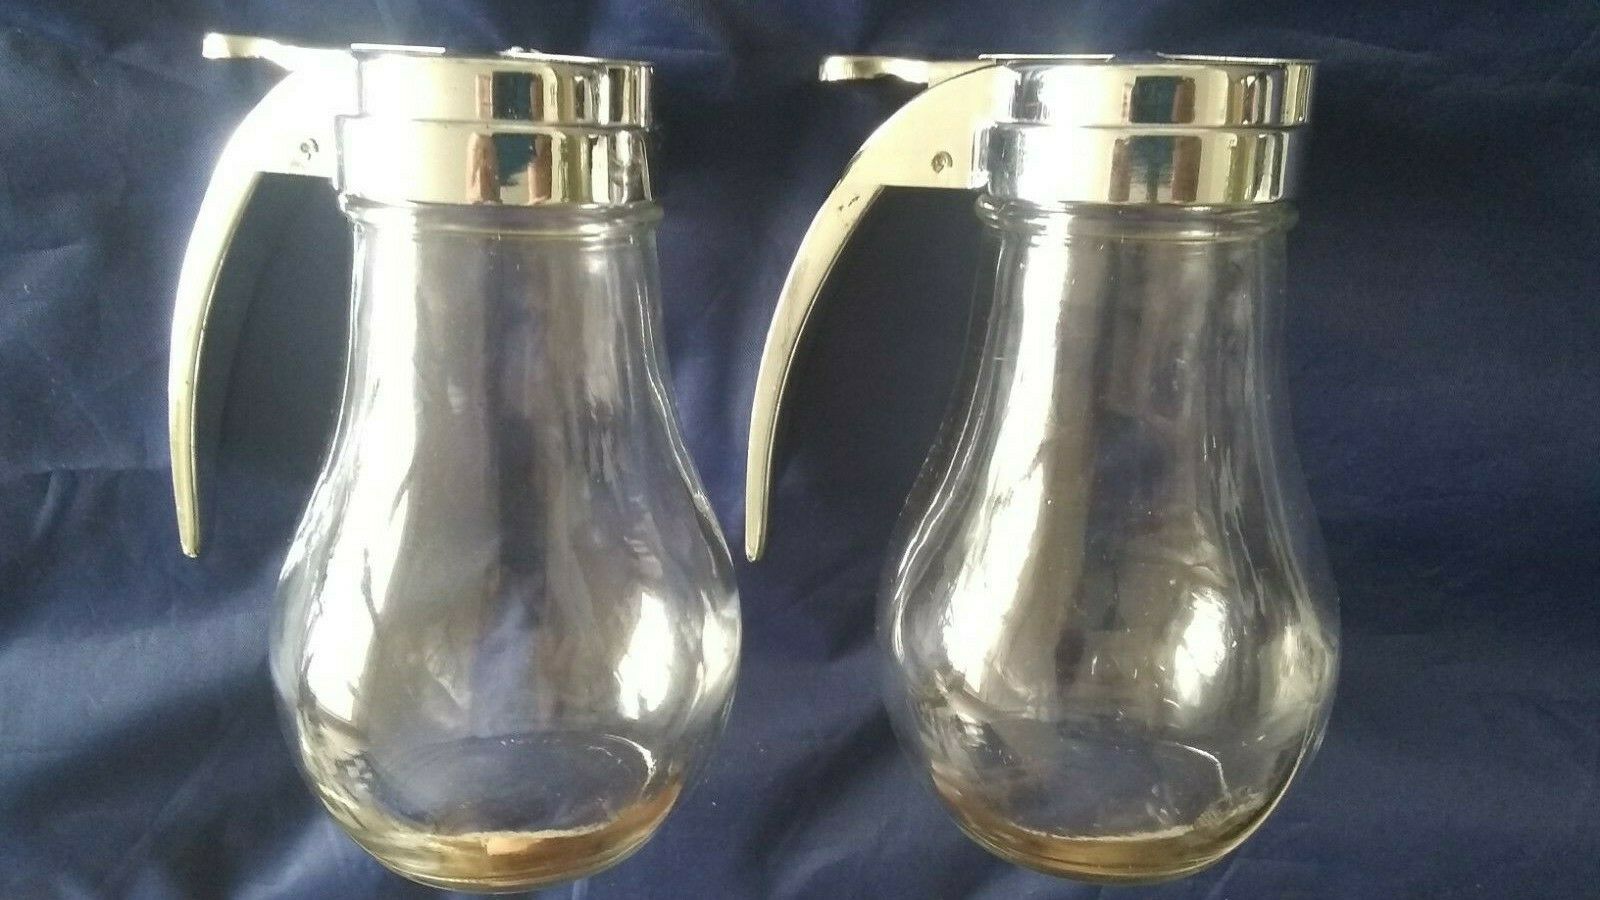 Two New Vintage 6” Tall Glass Metal Lid - Handle Maple Syrup Or Sugar Dispenser